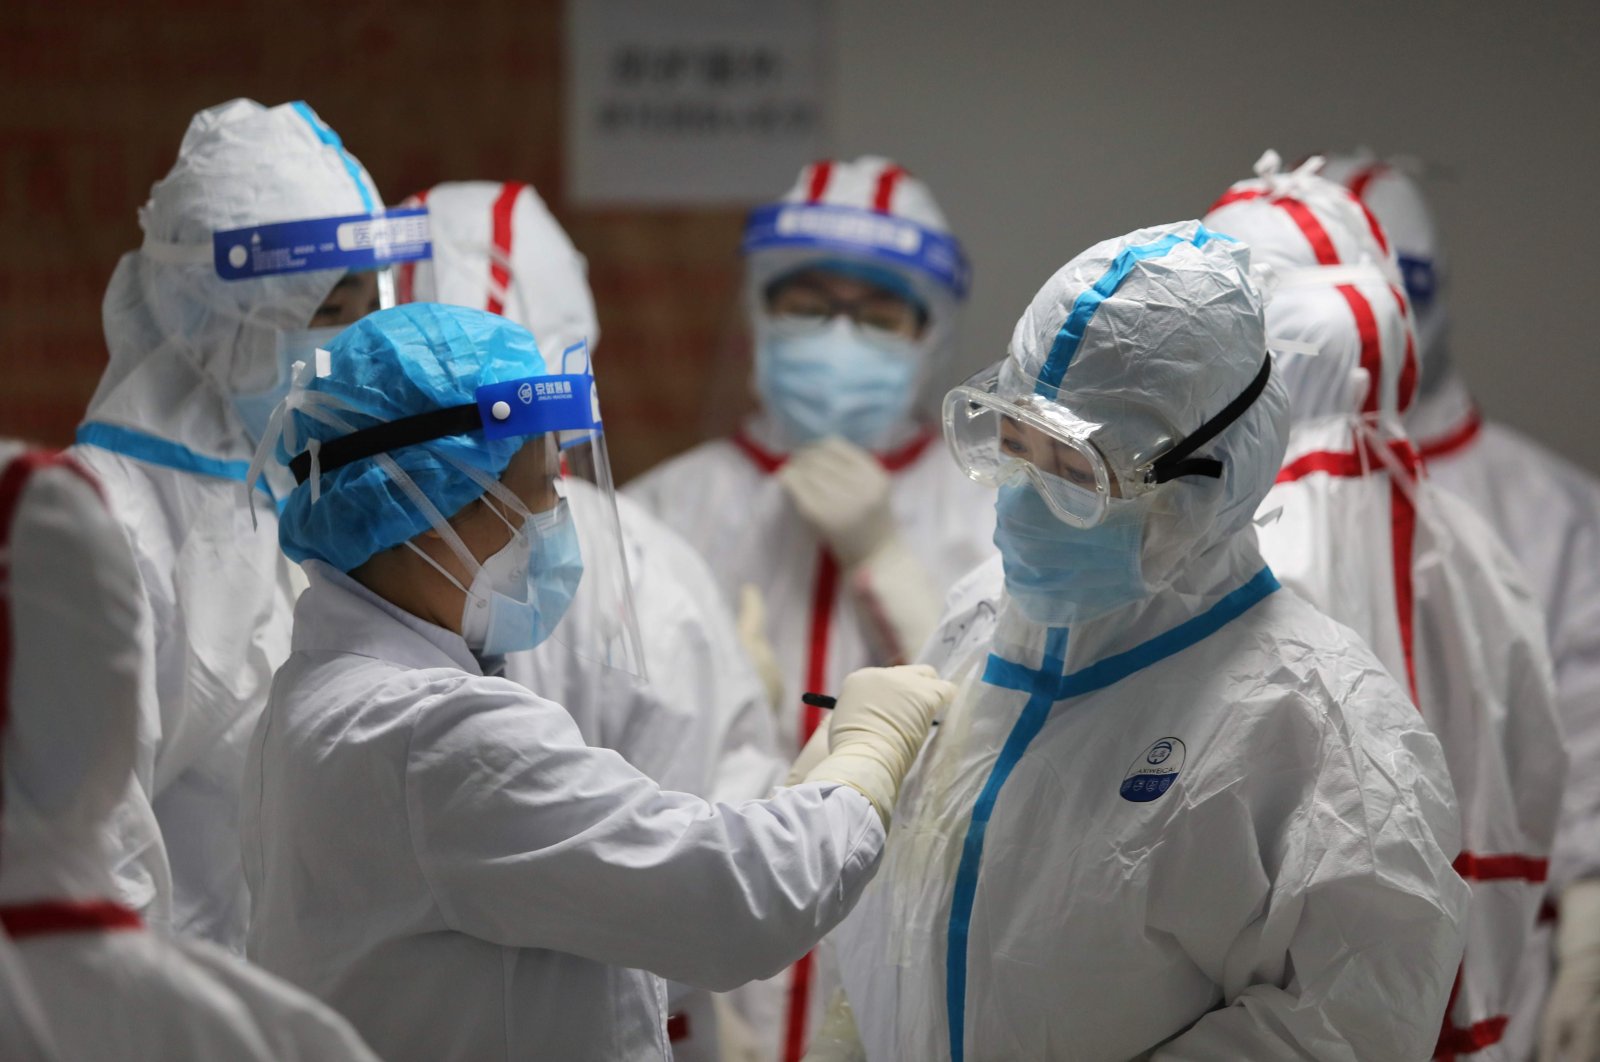 Medical staff write messages on their protective suits before attending to COVID-19 coronavirus patients at the Red Cross Hospital, Wuhan, March 16, 2020. (AFP Photo)